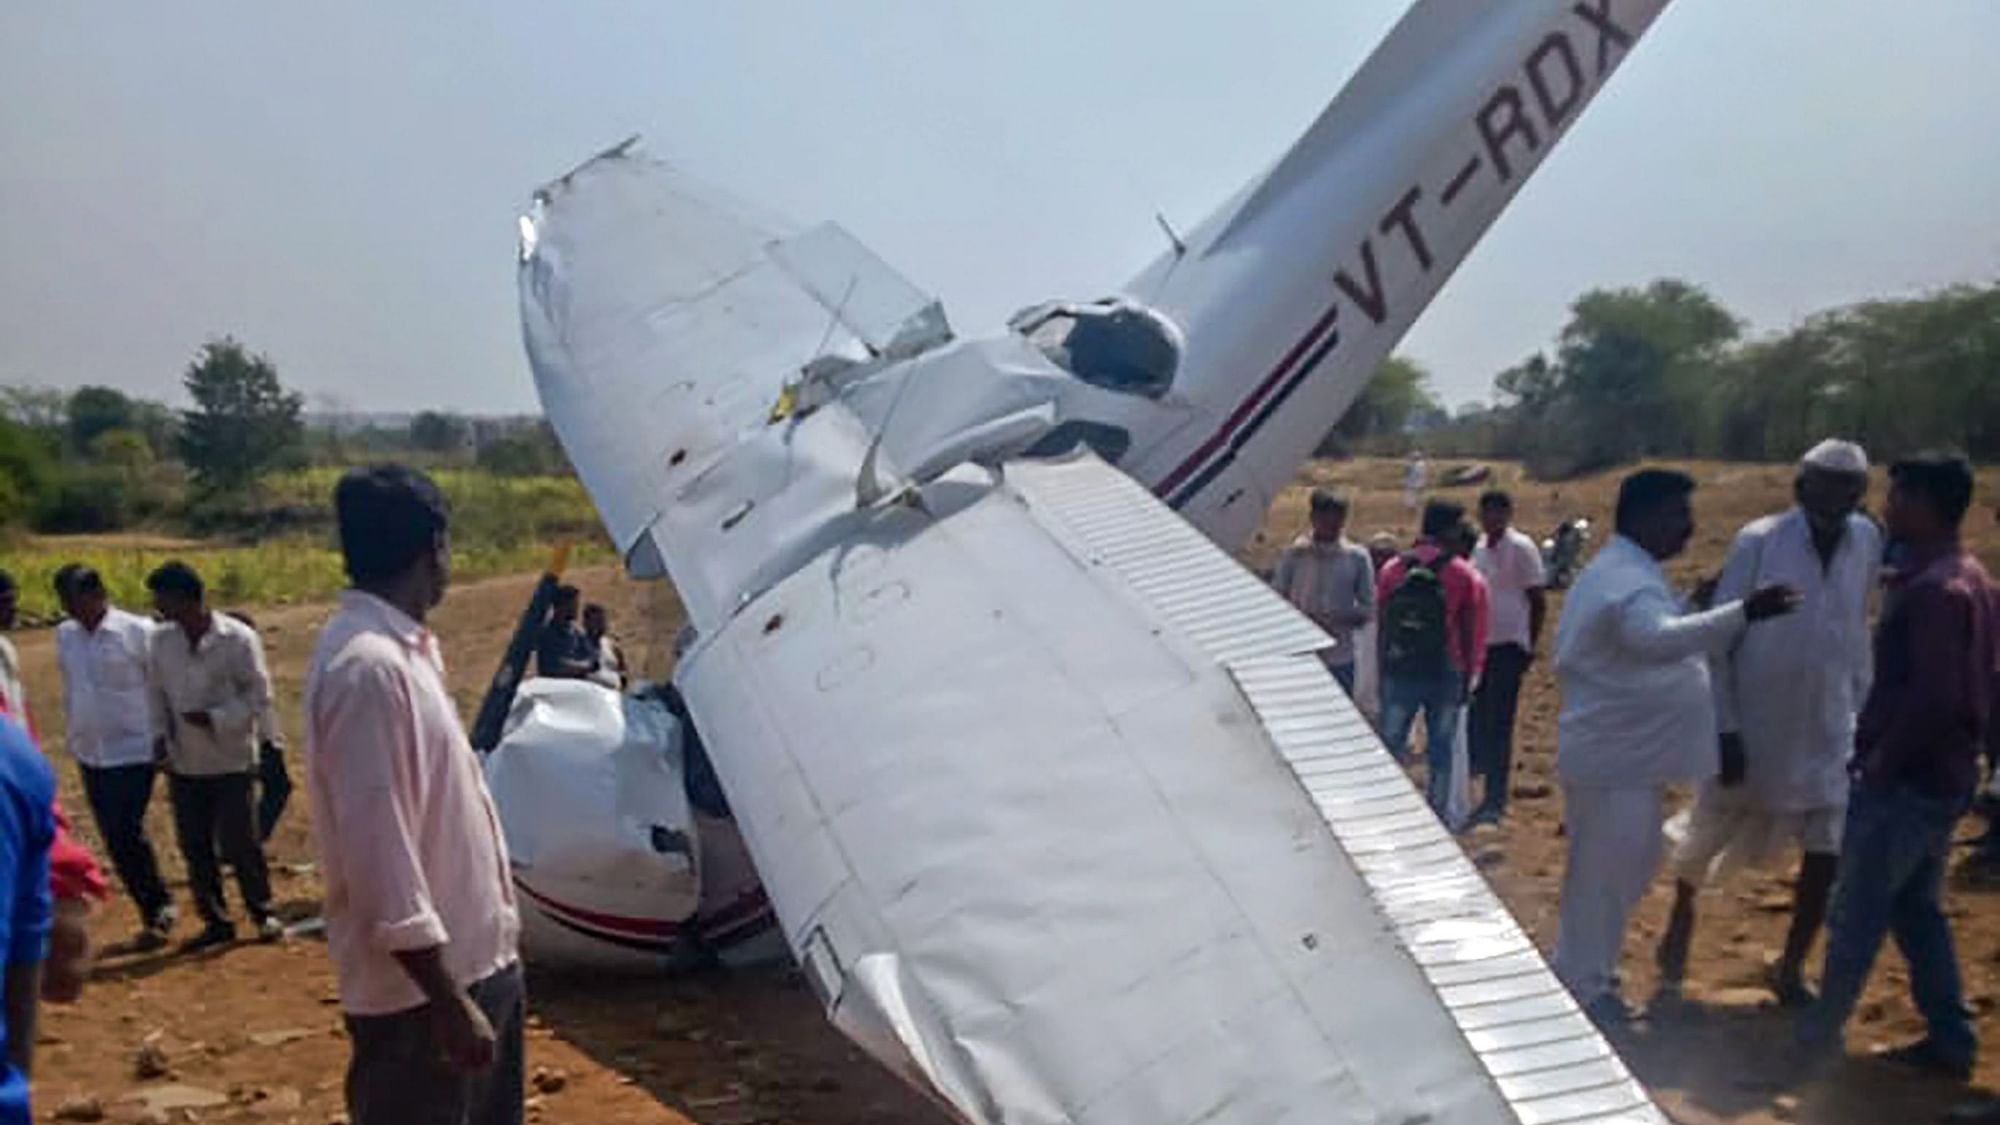  People inspect the wreckage of a crashed aircraft being used for civil aviation training in Pune district.